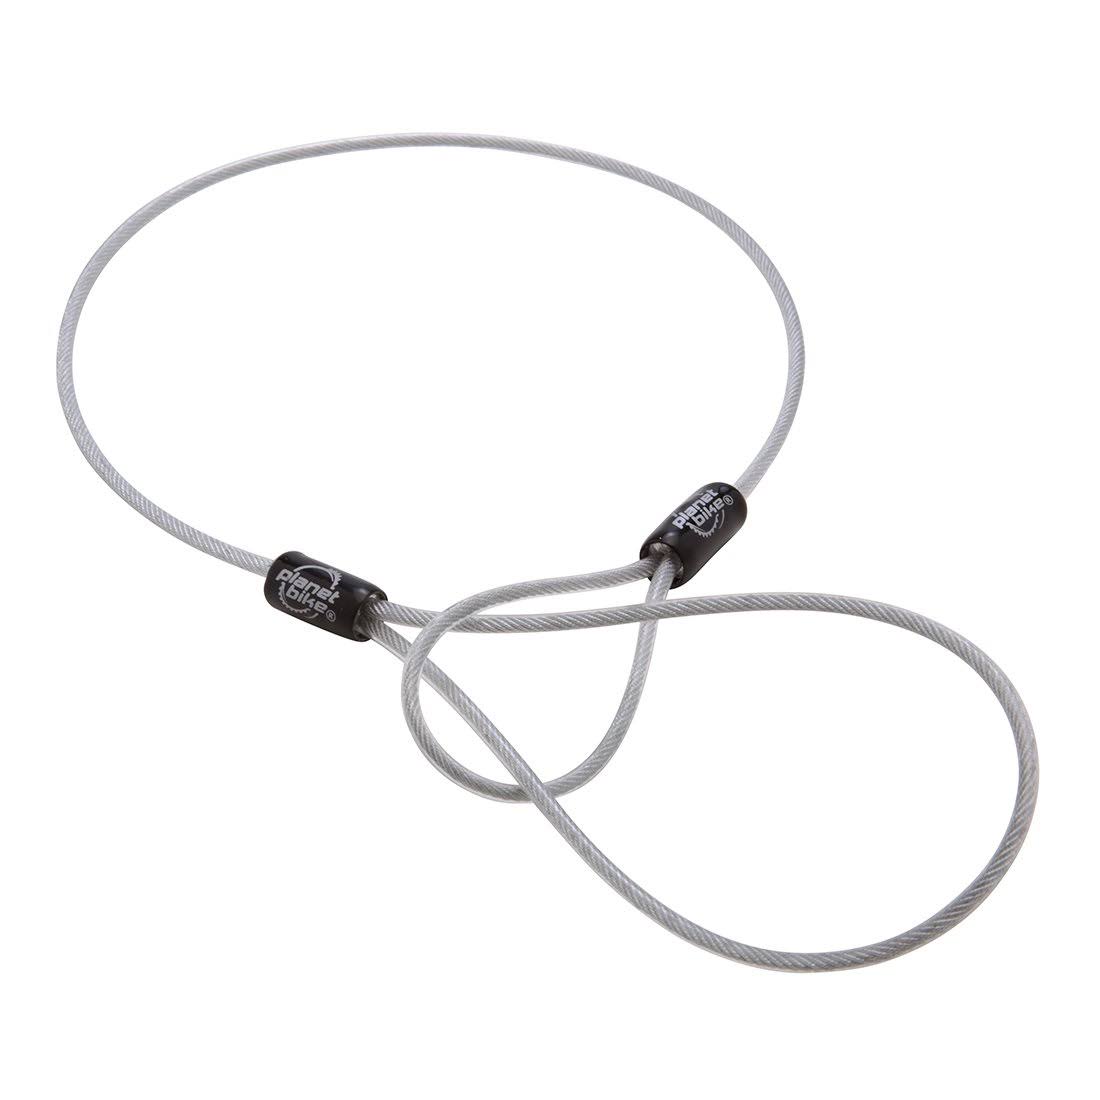 Planet Bike Seat Leash Cable - 3mm x 24"